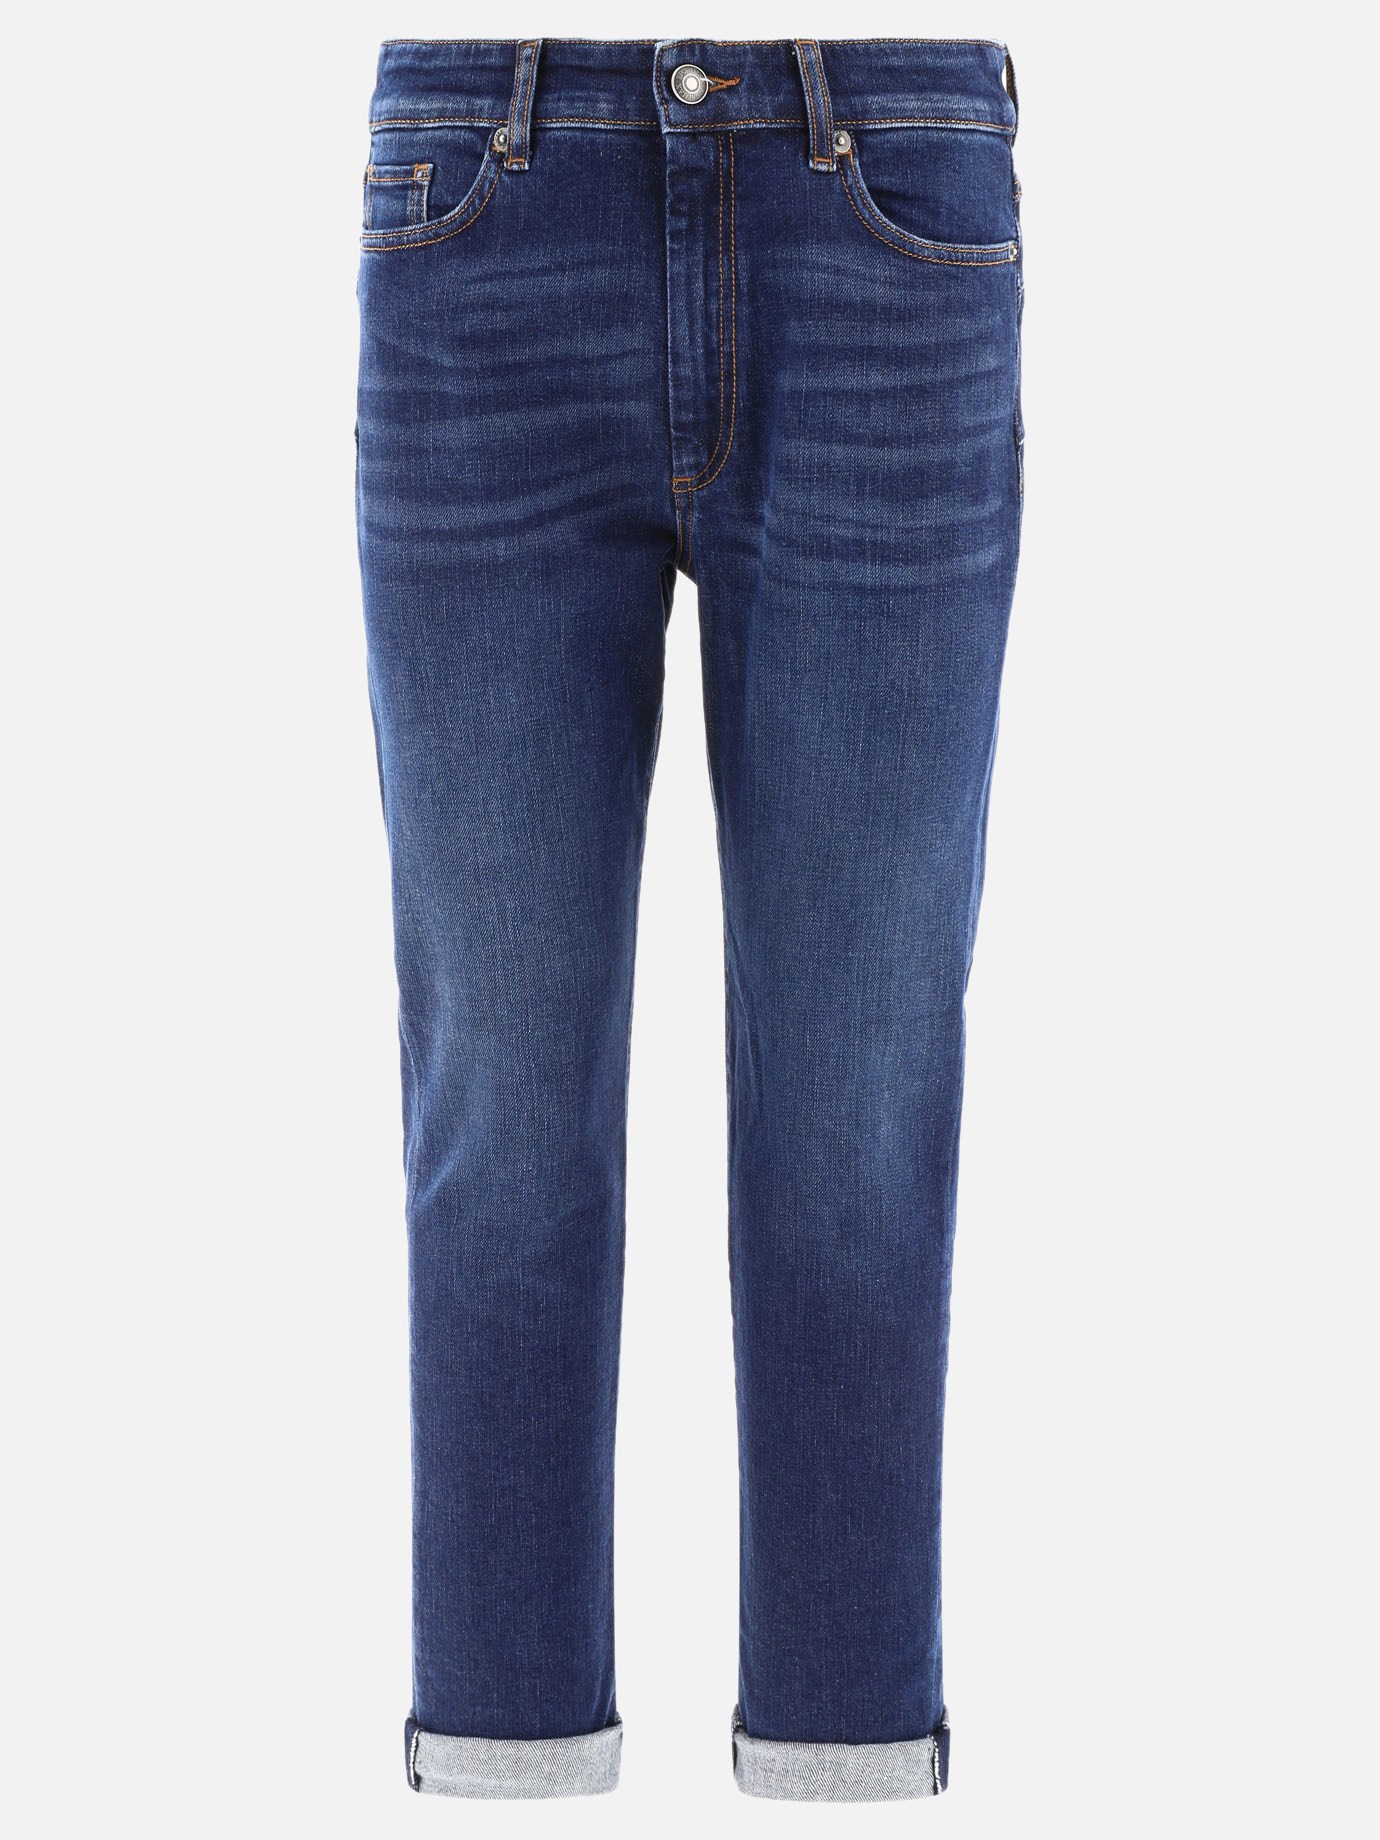 Jeans  Amour  by Max Mara Sportmax